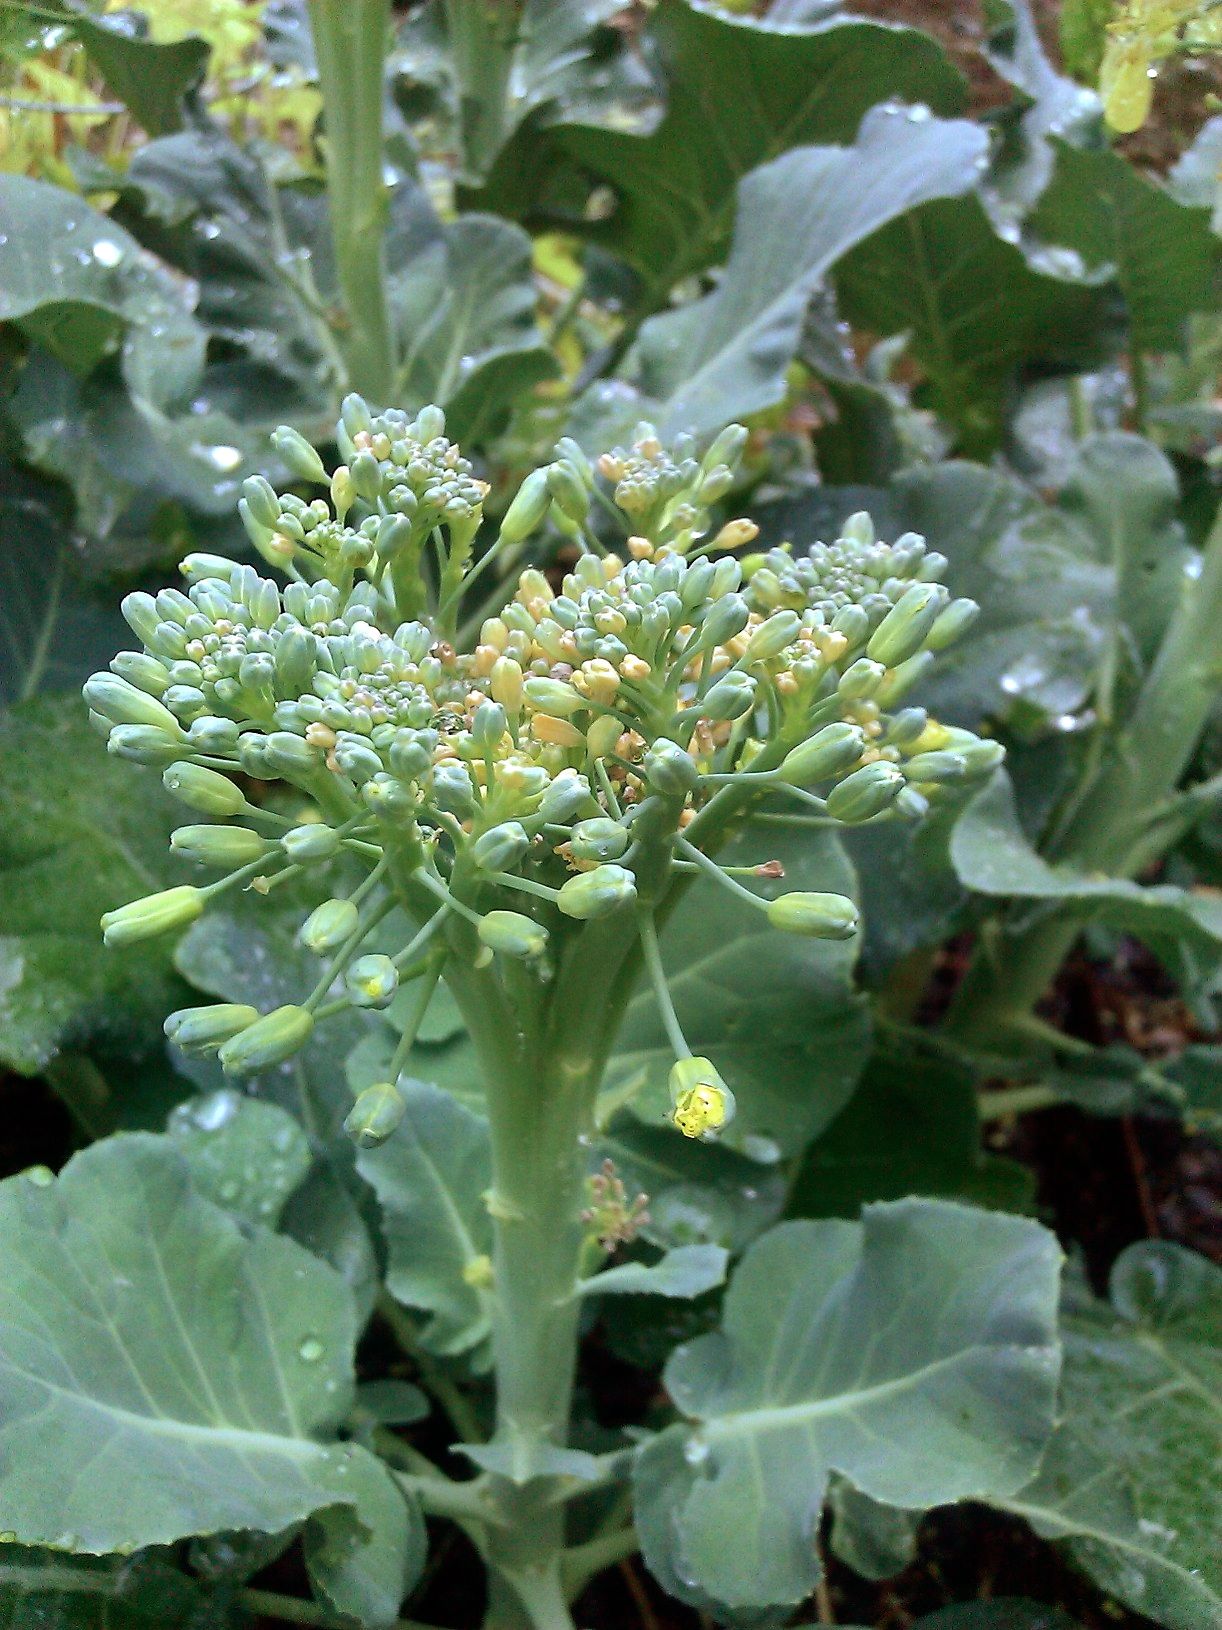 A broccoli head starting to flower